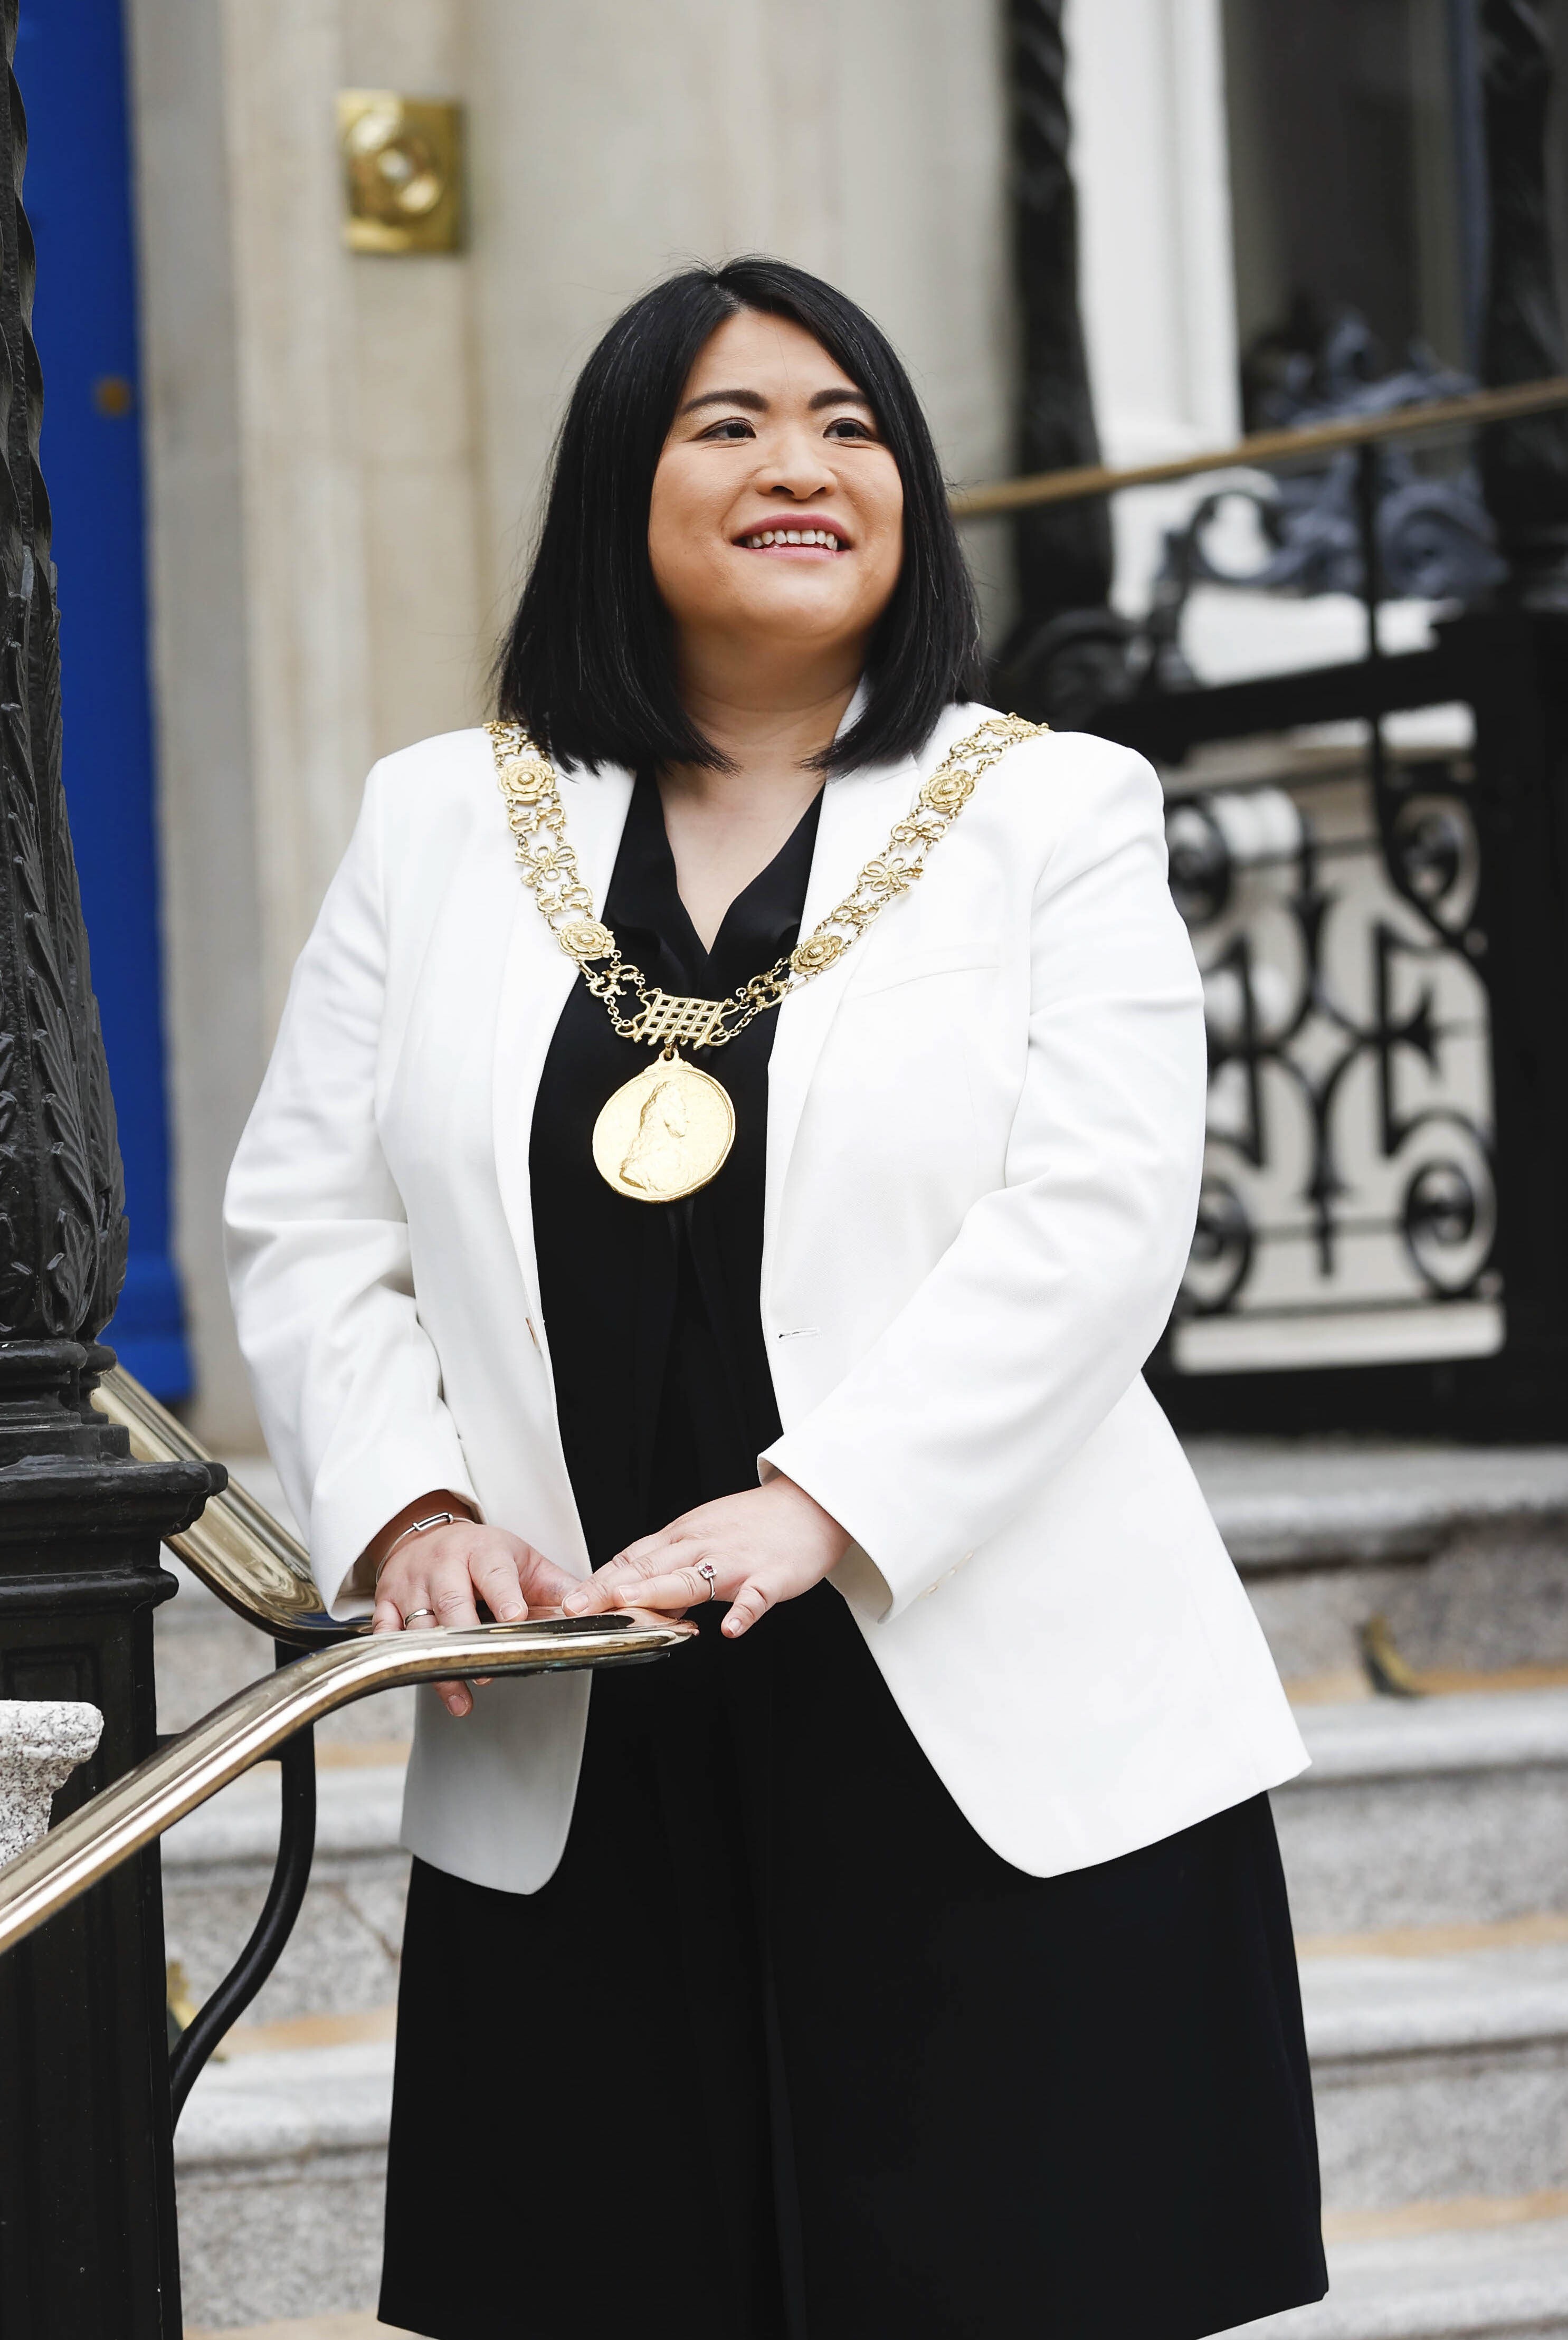 Hazel Chu, the first ethnically Chinese Lord Mayor of Dublin, takes a lot of inspiration from the work ethic of her Hong Kong immigrant parents, and is determined her daughter won’t face the same racism she has growing up in Ireland and lately in politics. Photo: courtesy of Hazel Chu